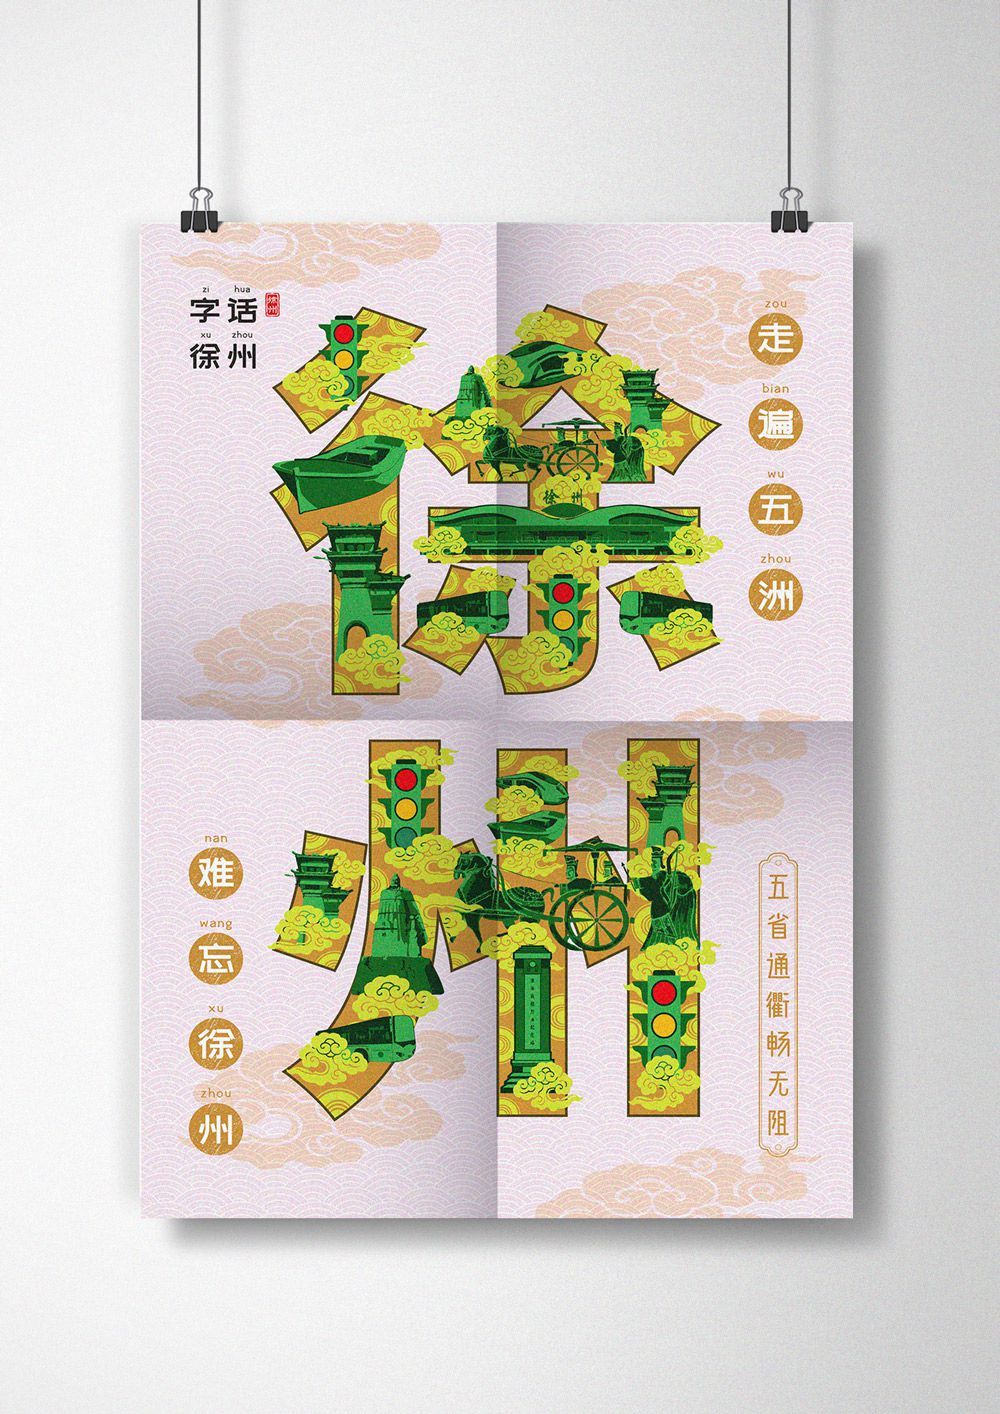 Creative Chinese Fonts for Xuzhou-Turn text into graphics for the first time